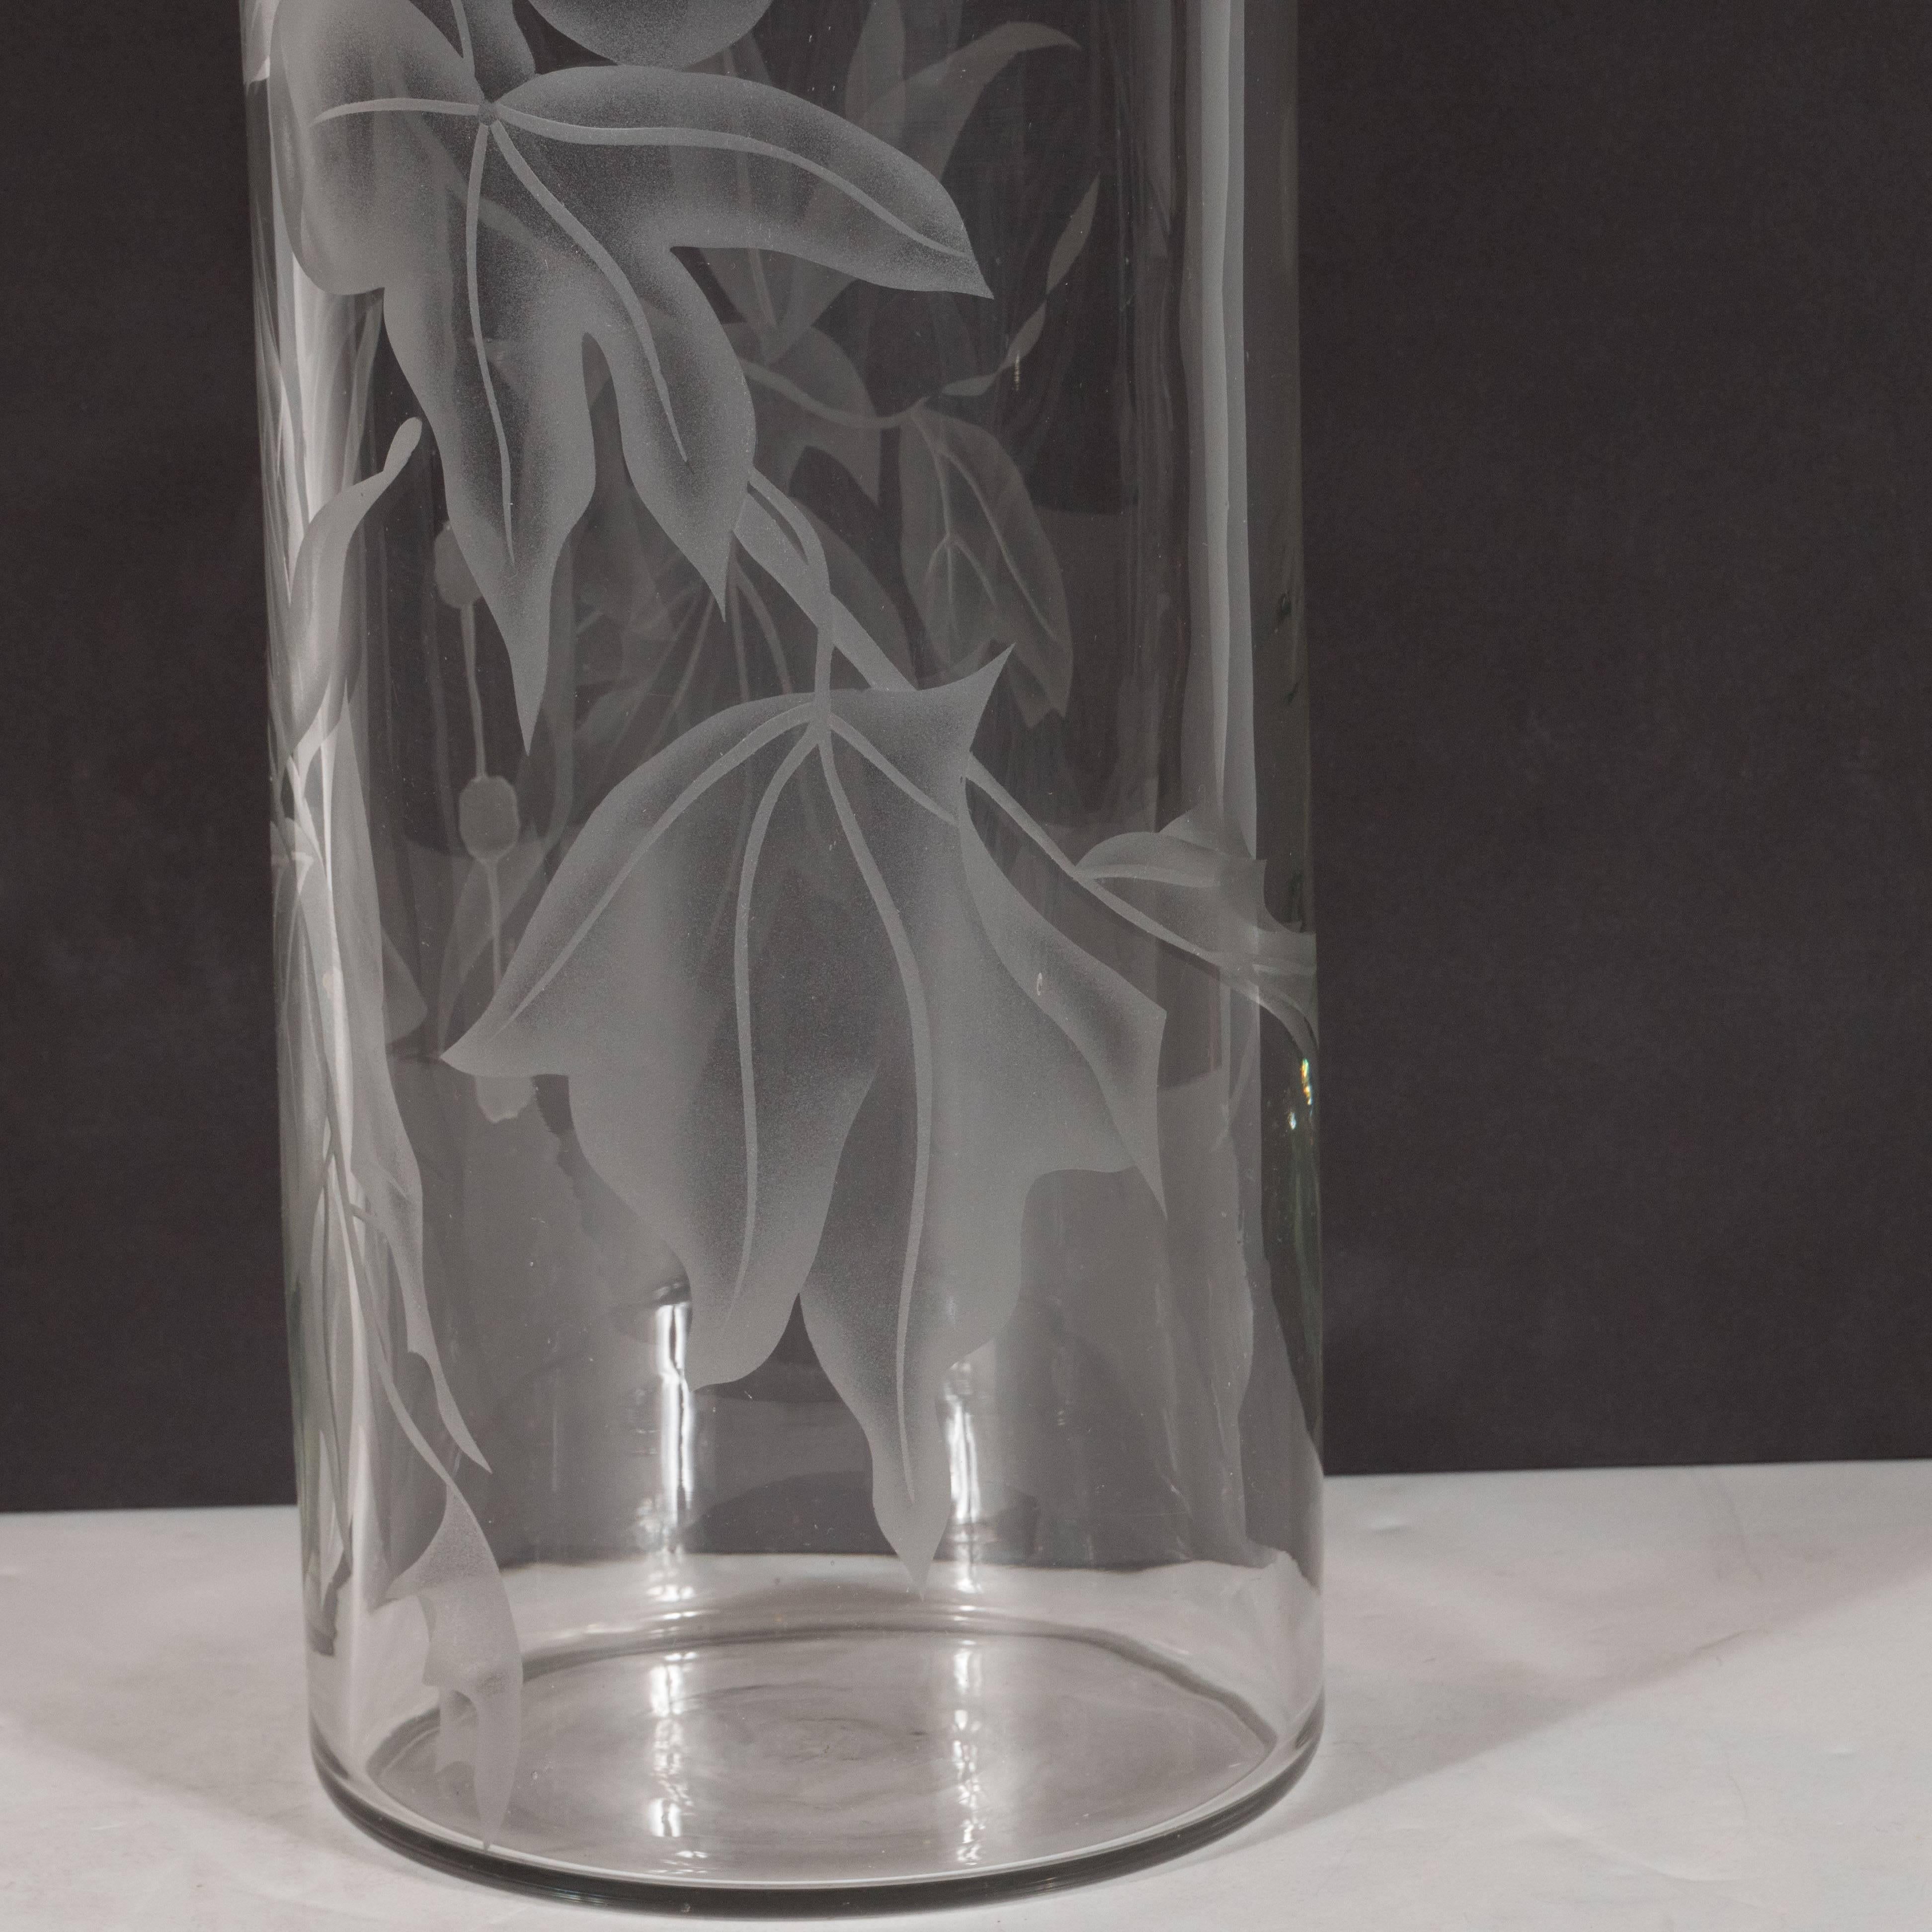 Mid-20th Century Art Deco Acid Etched Vase with Maple Leaf Motif by Dorothy Thorpe